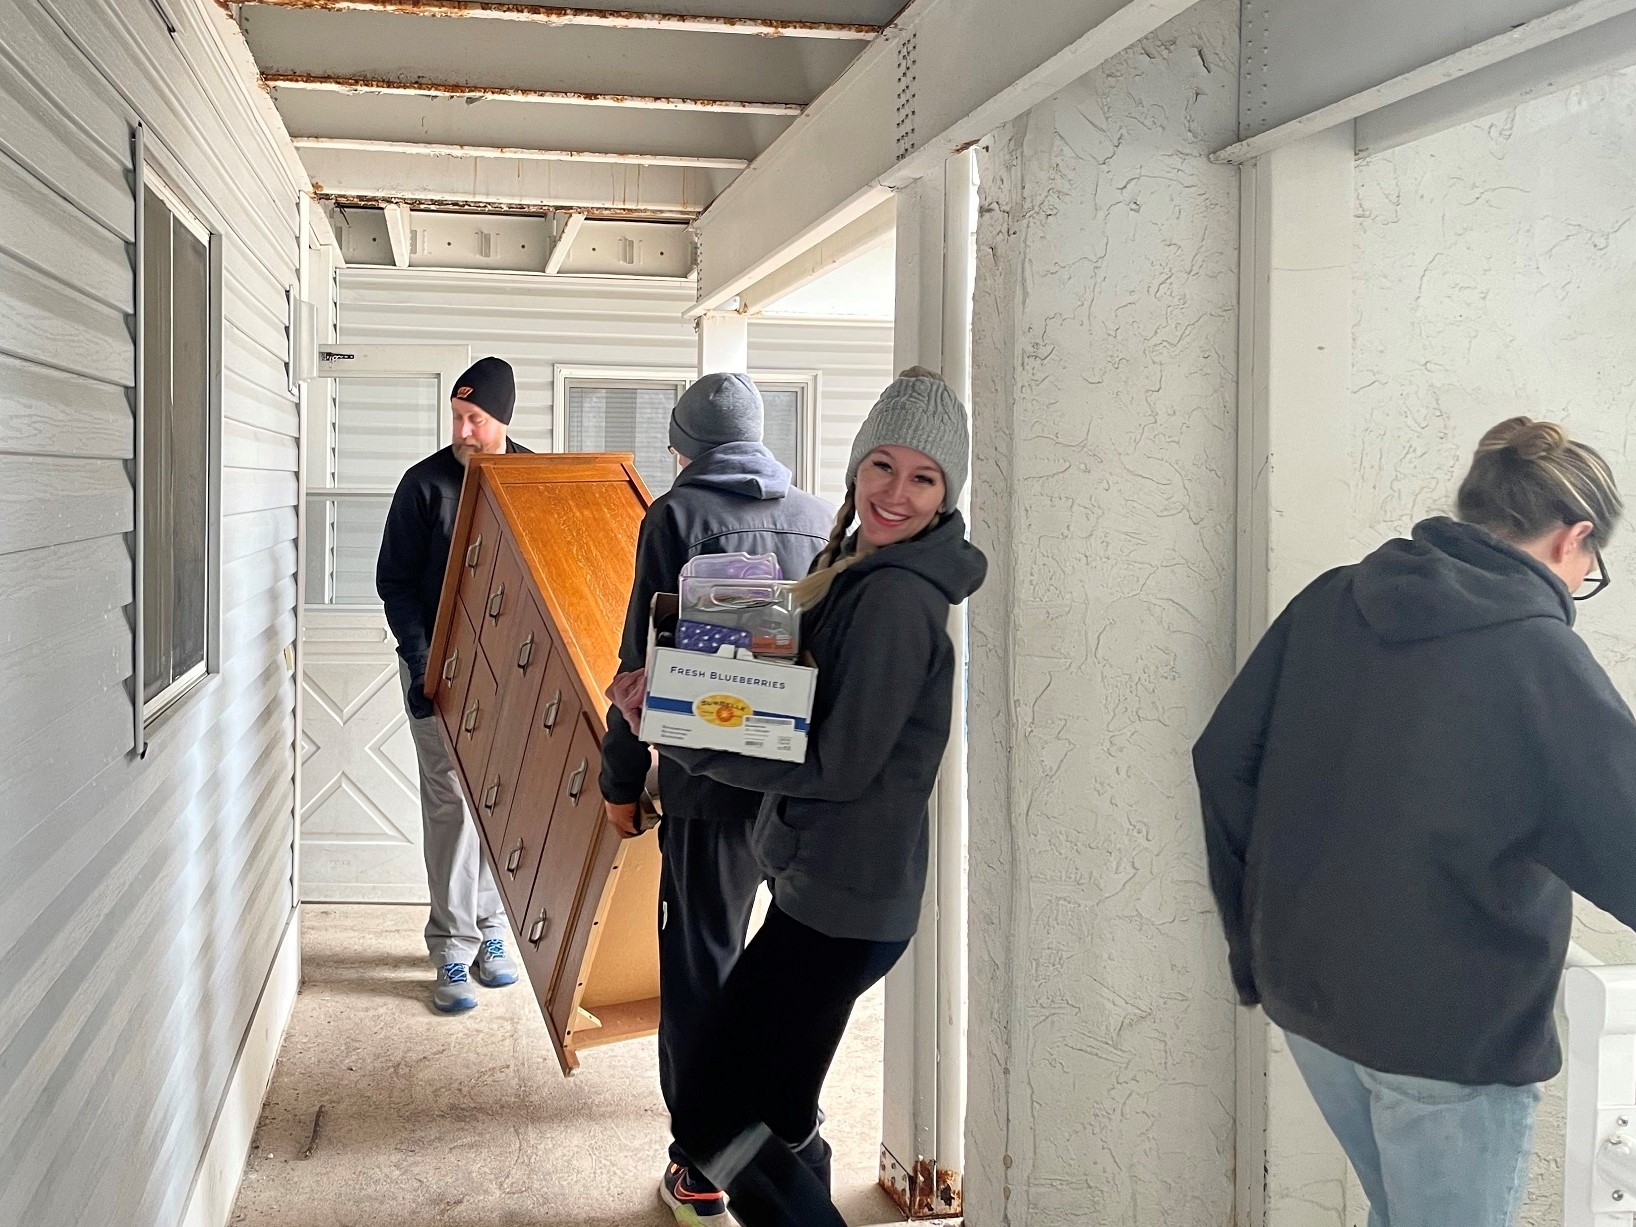 Felicia Diny, founder of the nonprofit Felicia's Donation Closet, and volunteers move a dresser and other items to furnish an apartment. (Gaby Vinick/WPR)